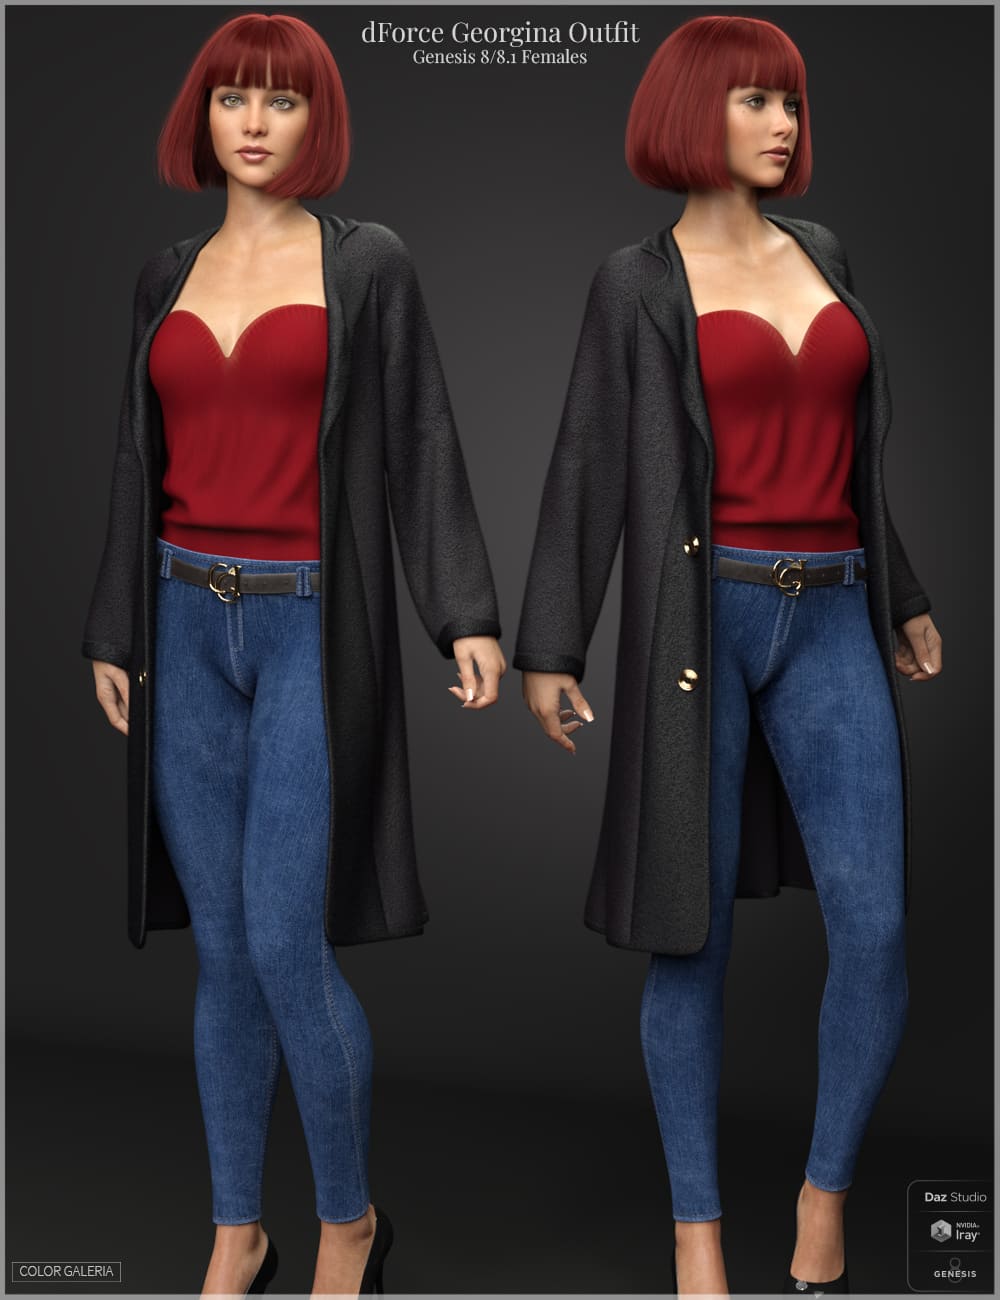 dForce Georgina Outfit for Genesis 8 and 8.1 Females_DAZ3DDL